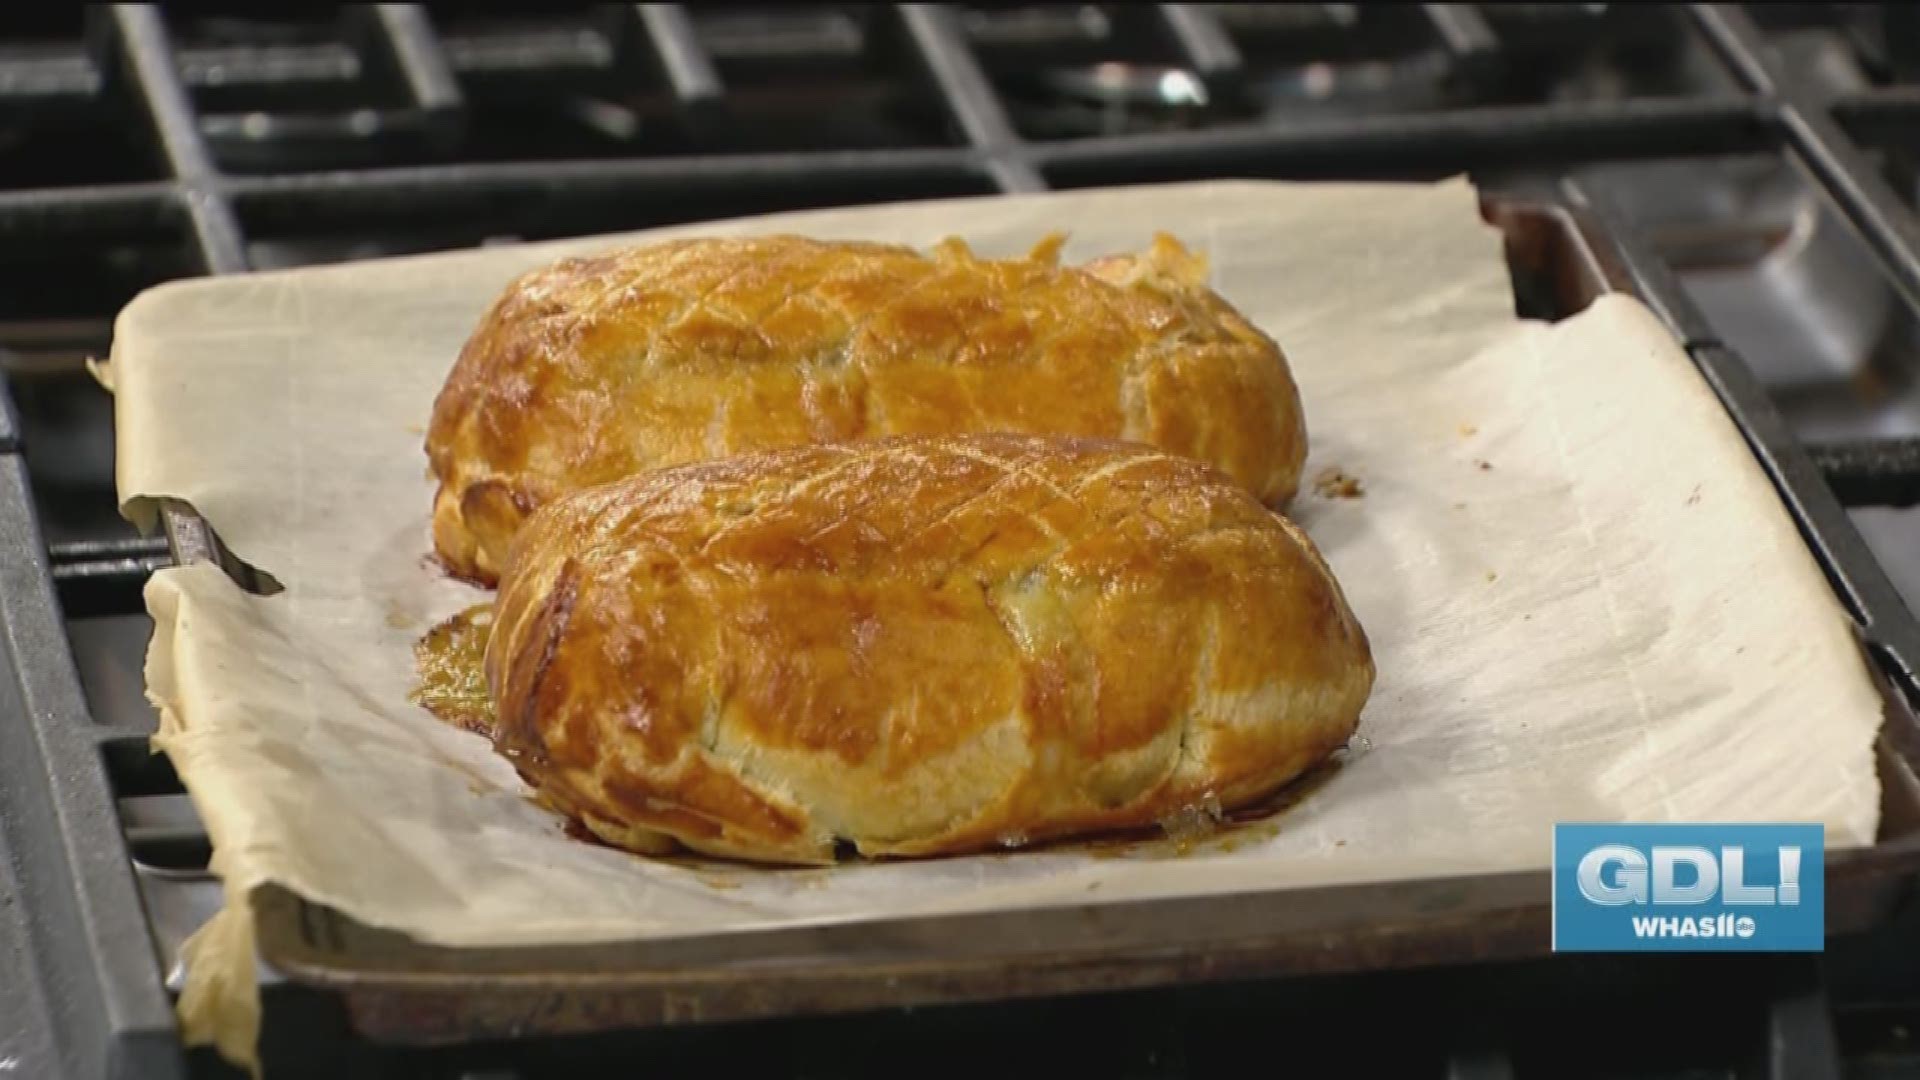 The Peckish Personal Chef Kirsten Peckham stopped by to show how to make Salmon Wellingtons. You can find her on Facebook and Instagram or by calling 502-296-1118.